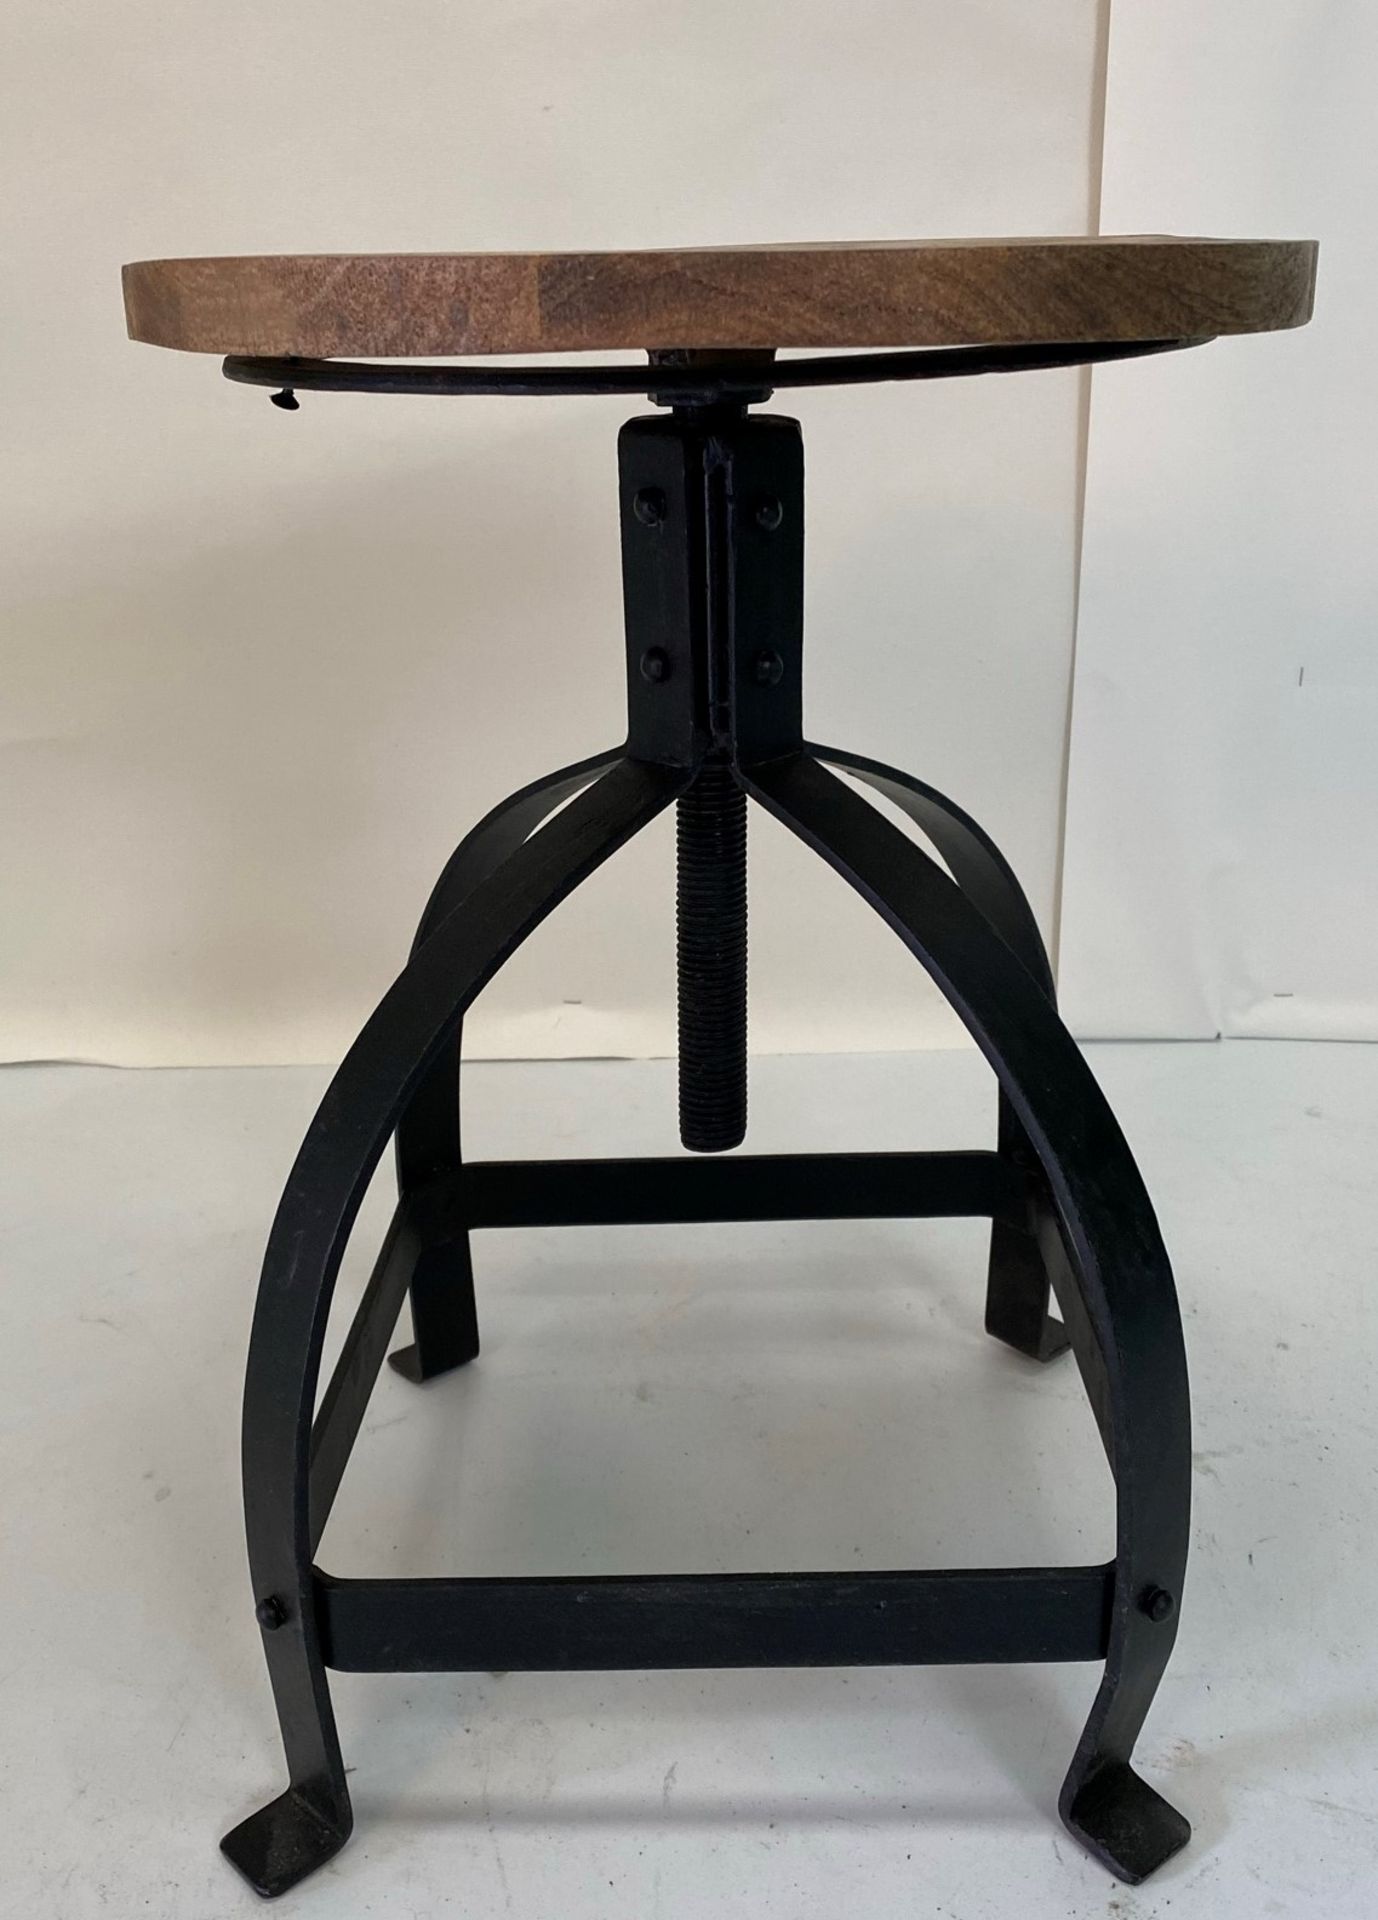 An Industrial low stool with wooden seat and black metal frame - Image 2 of 4